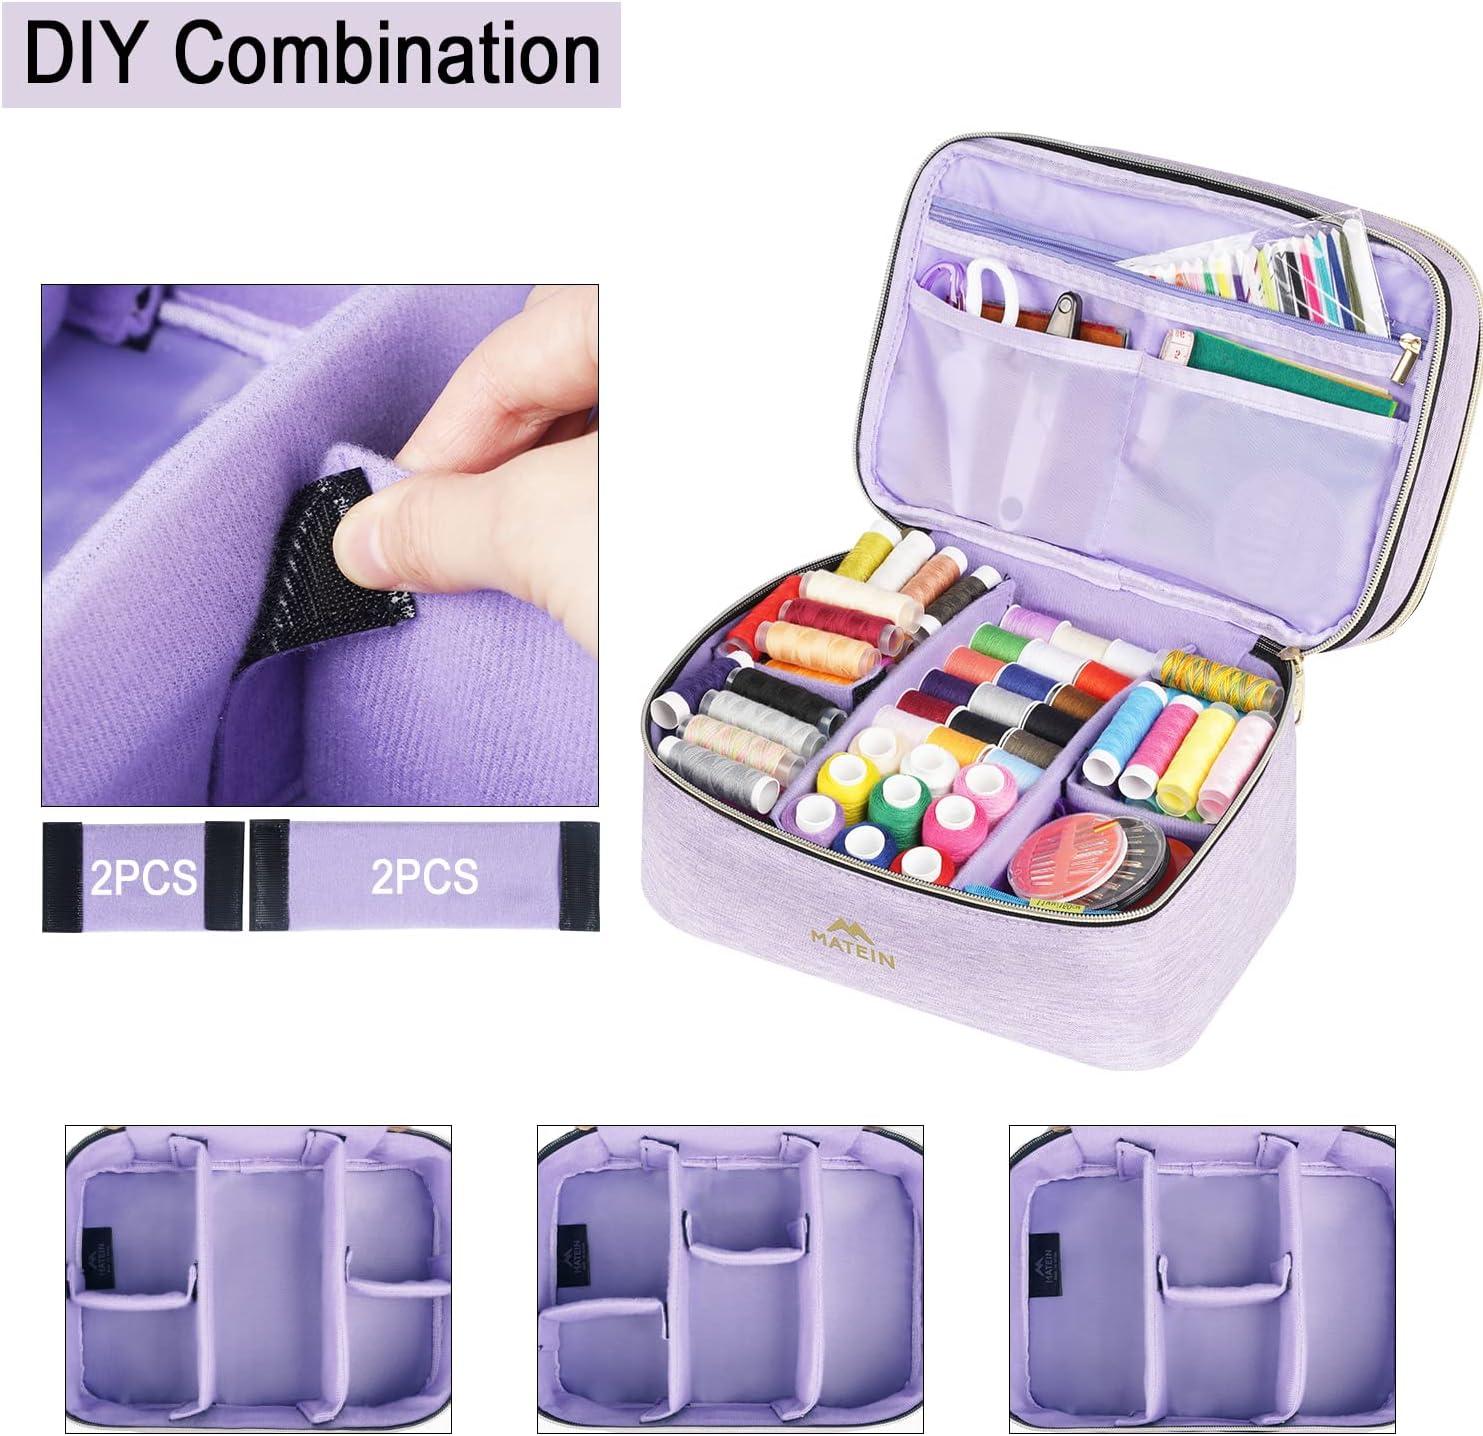 Sewing Supplies Organizer Double-Layer Sewing Box Organizer Accessories  Storage Bag Large Sewing Basket Water Resistant Travel Women Sewing Gifts  for Kit Scissors Thread Pins Needles Clips